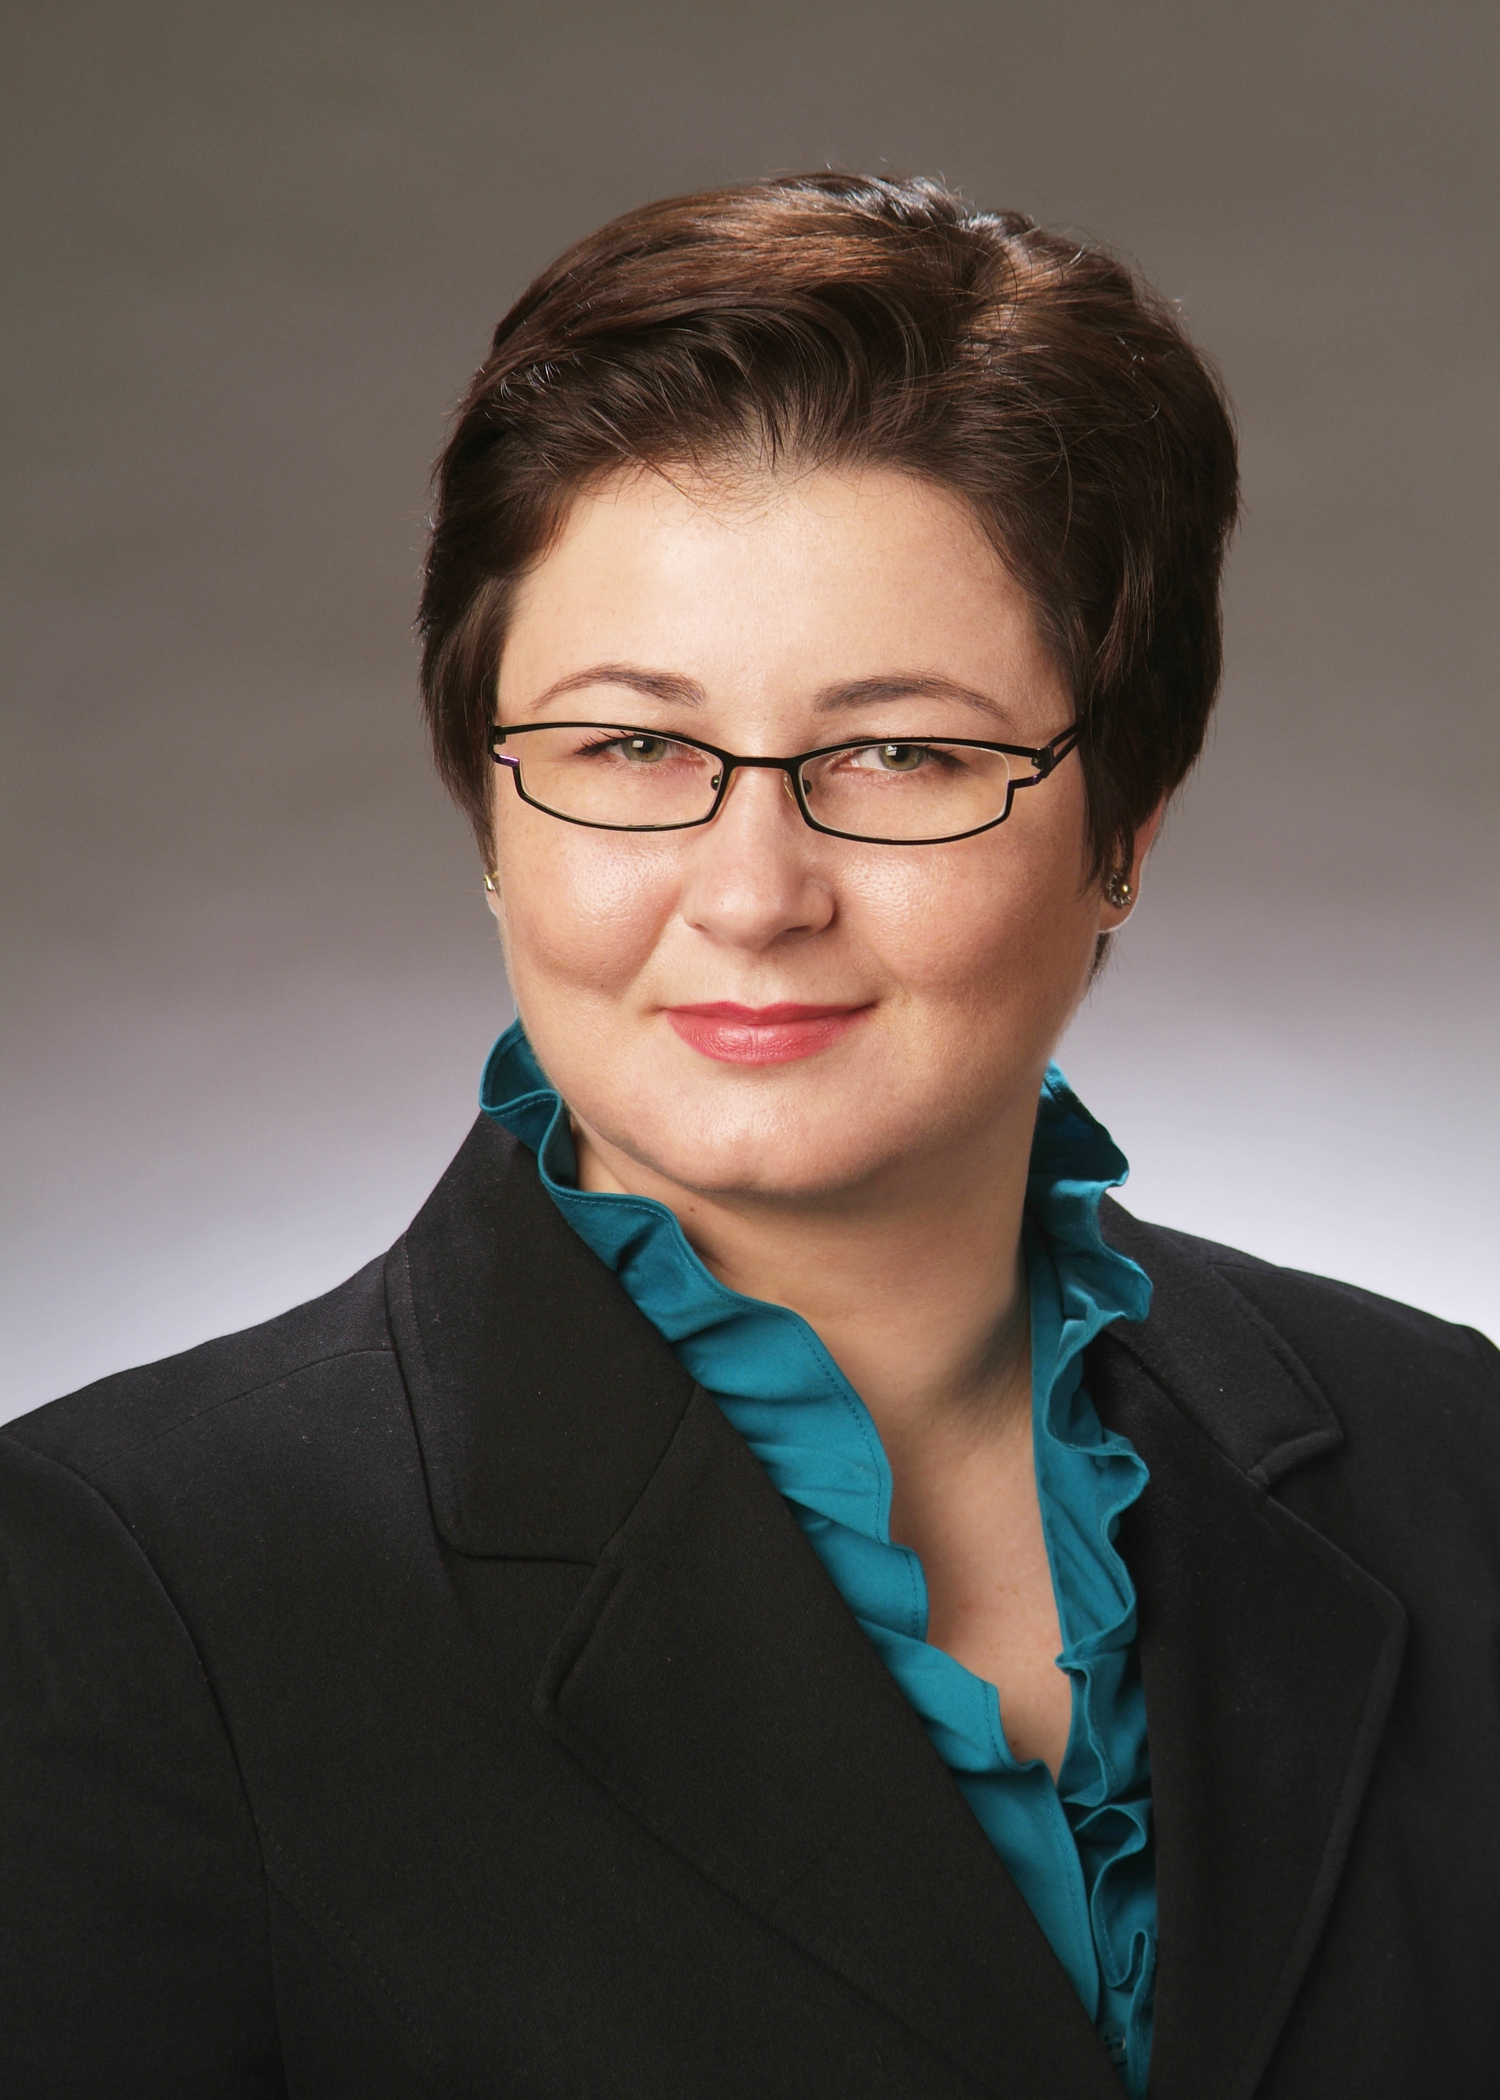 Adriana Raus, MD - An Independent Provider of Memorial Healthcare